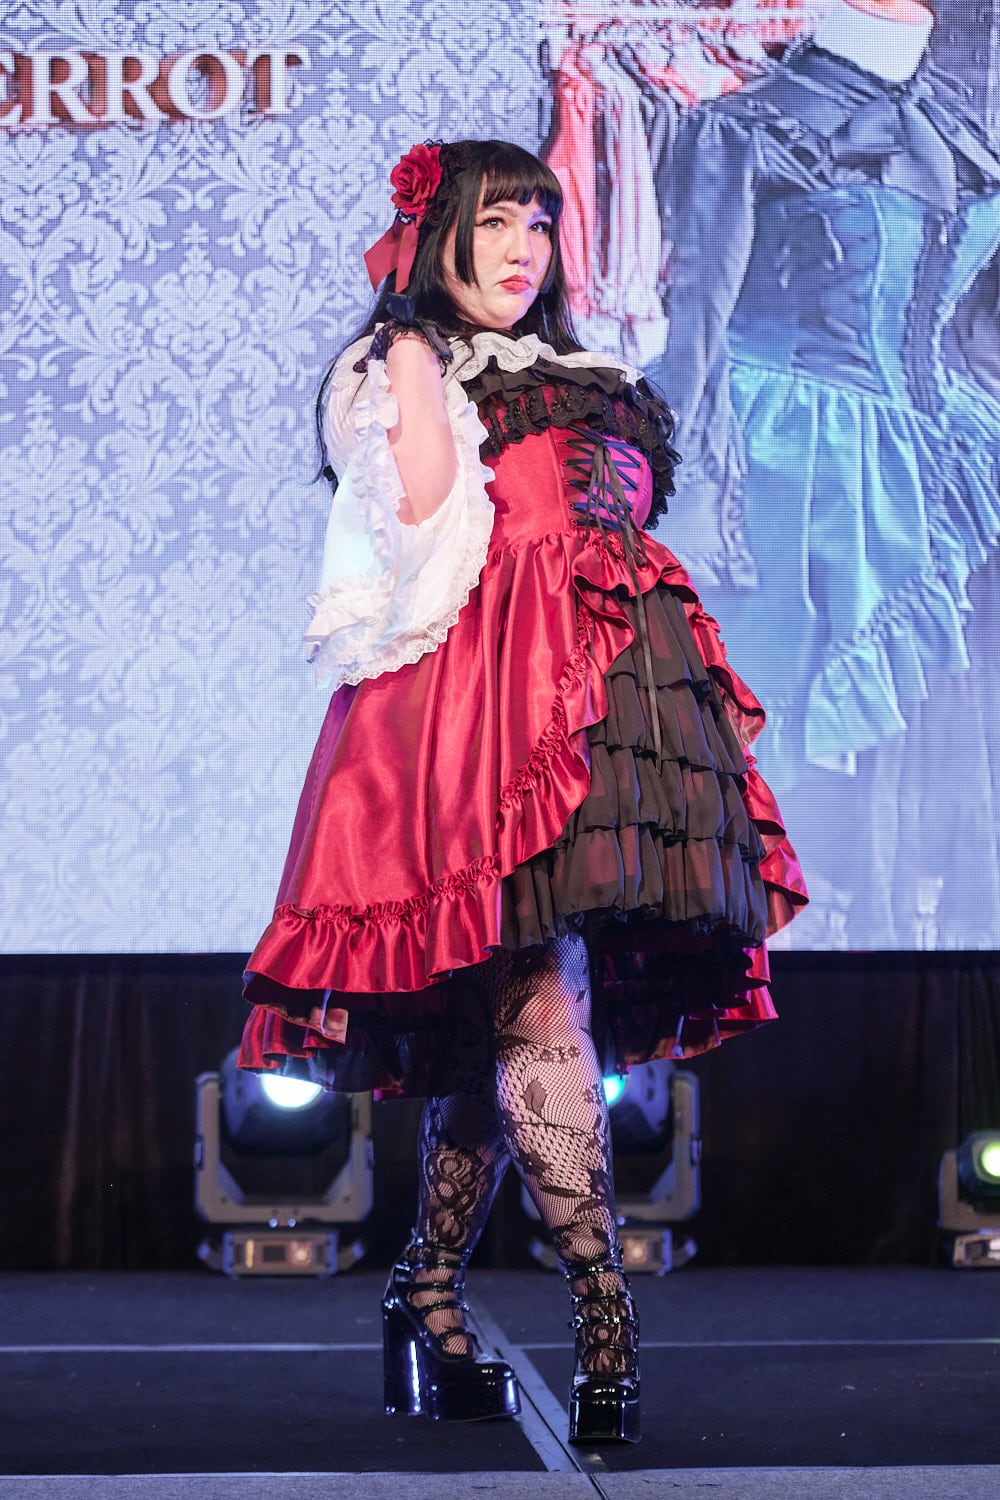 Plus size gothic lolita wearing red and black shantung bustle dress with white princess sleeve blouse, lace tights, and black shoes - full body 4.